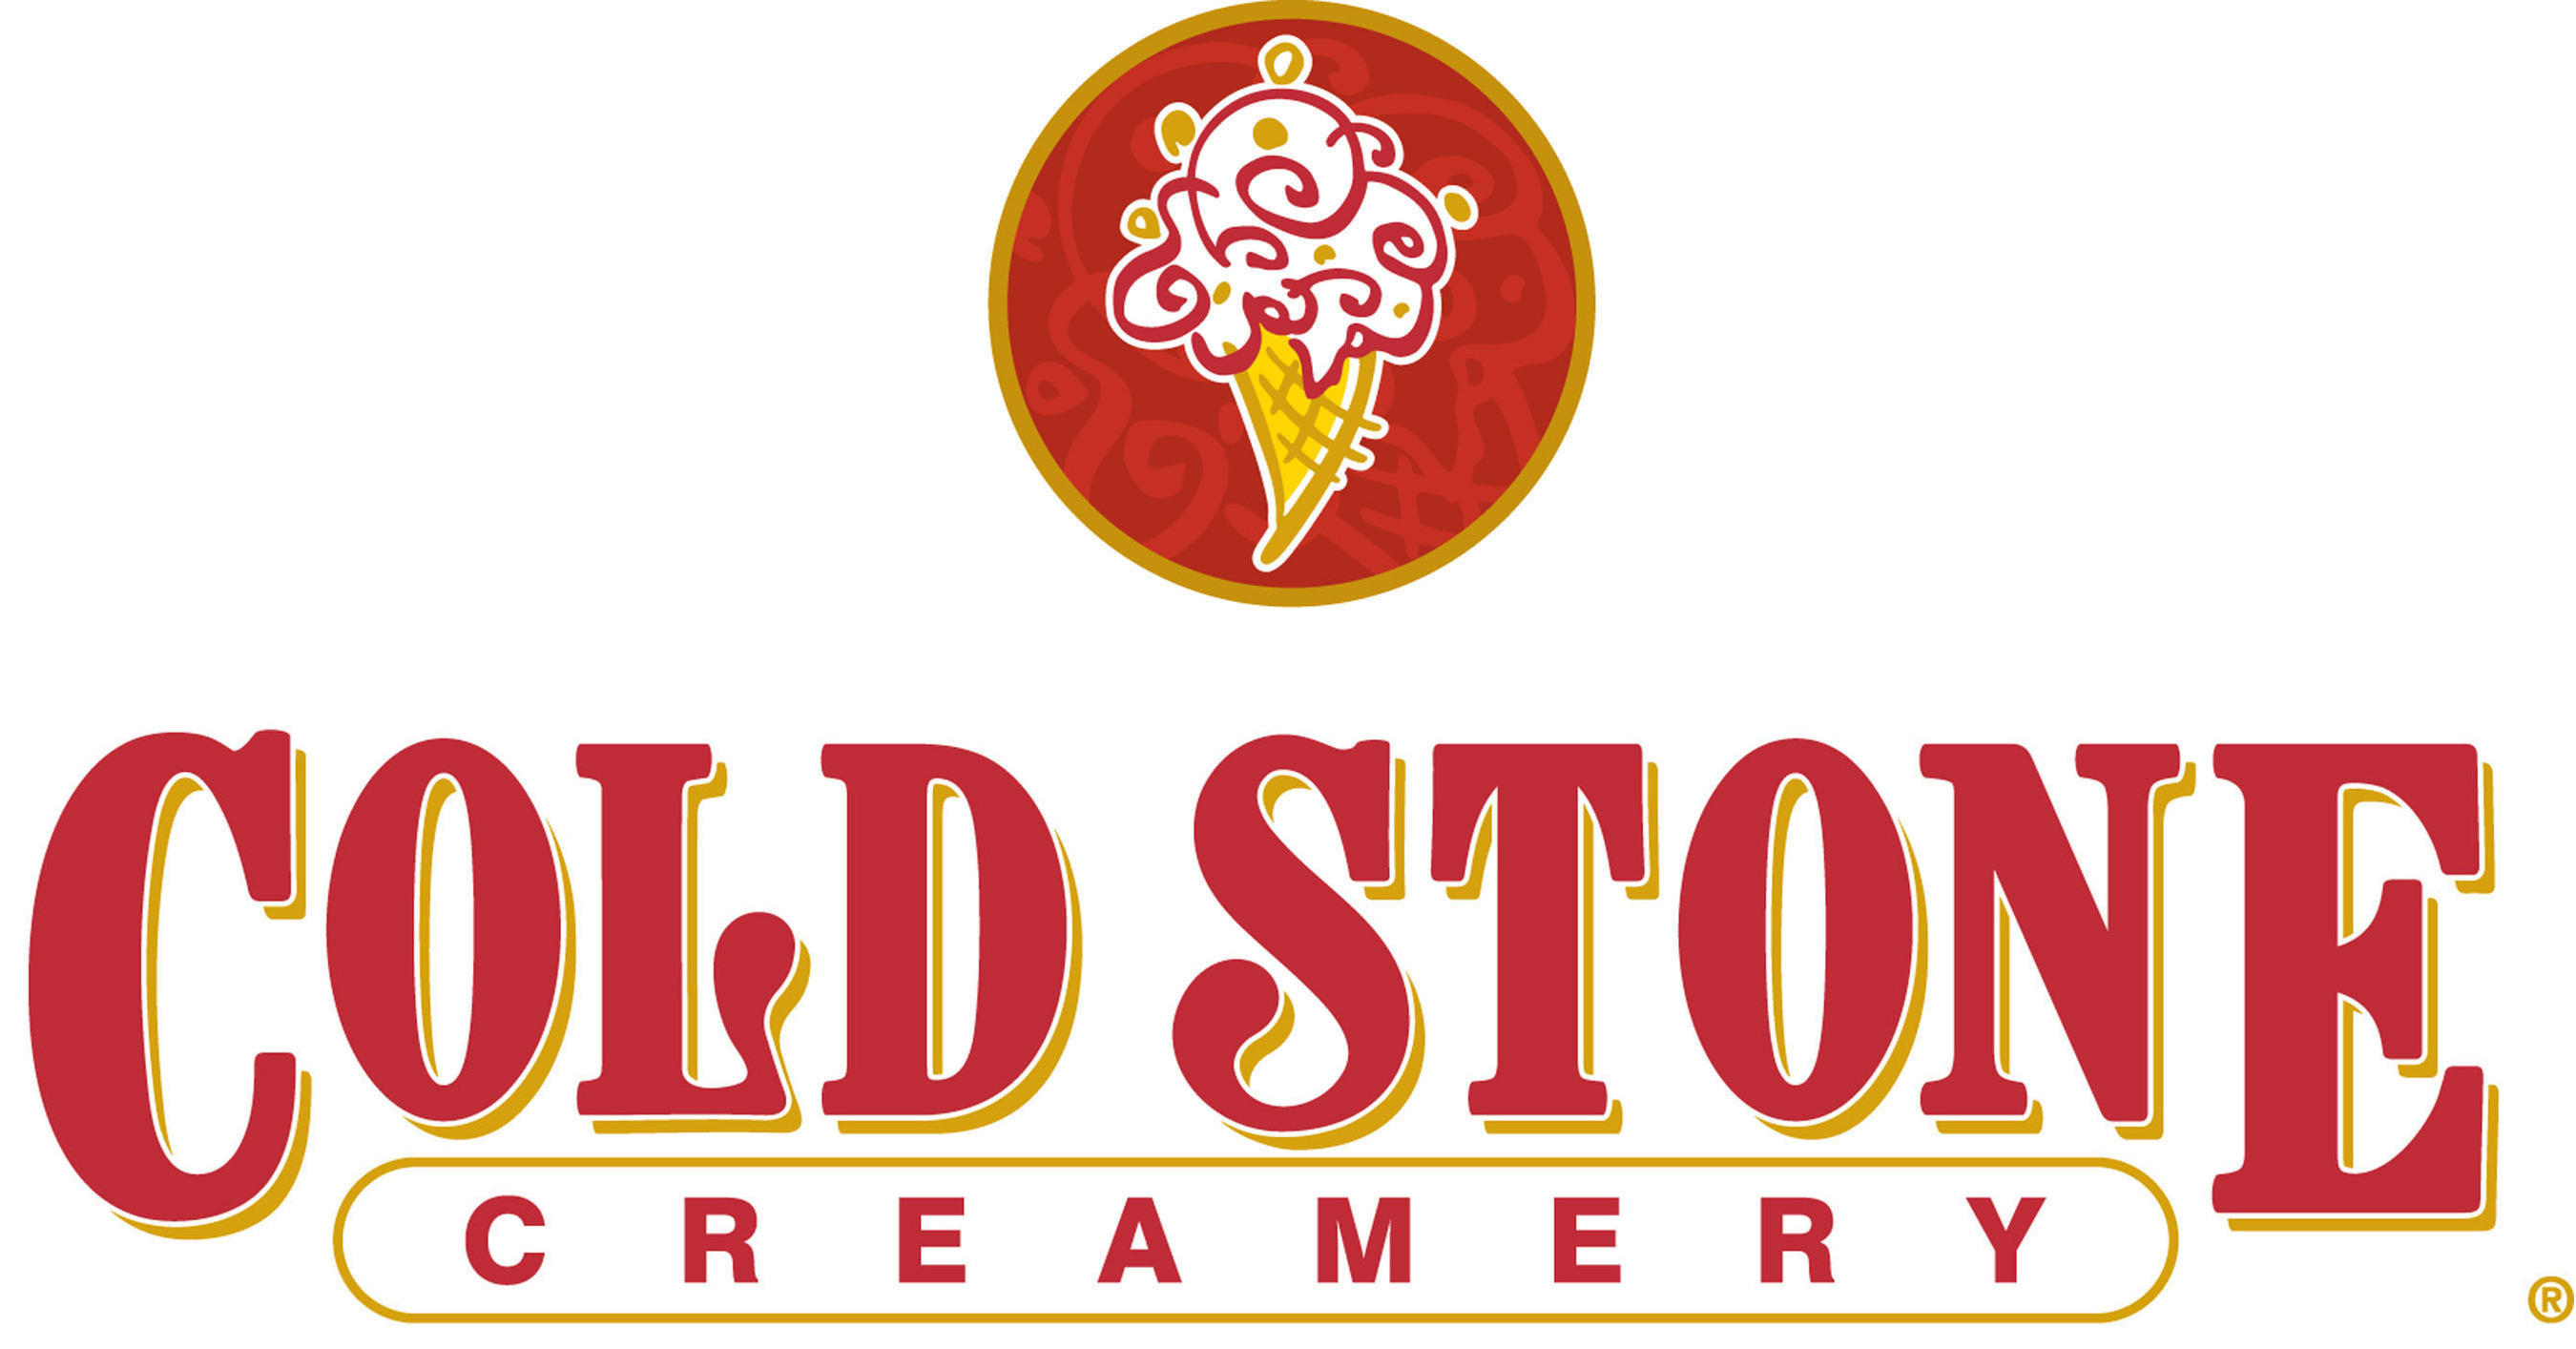 Cold Stone Creamery delivers The Ultimate Ice Cream Experience(r) through a community of franchisees who are passionate about ice cream. The secret recipe for smooth and creamy ice cream is handcrafted fresh daily in each store, and then customized by combining a variety of mix-ins on a frozen granite stone. Headquartered in Scottsdale, Ariz., Cold Stone Creamery is a subsidiary of Kahala Brands, one of the fastest growing franchising companies in the world. For more information about Cold Stone Creamery, visit www.ColdStoneCreamery.com (PRNewsFoto/Cold Stone Creamery)